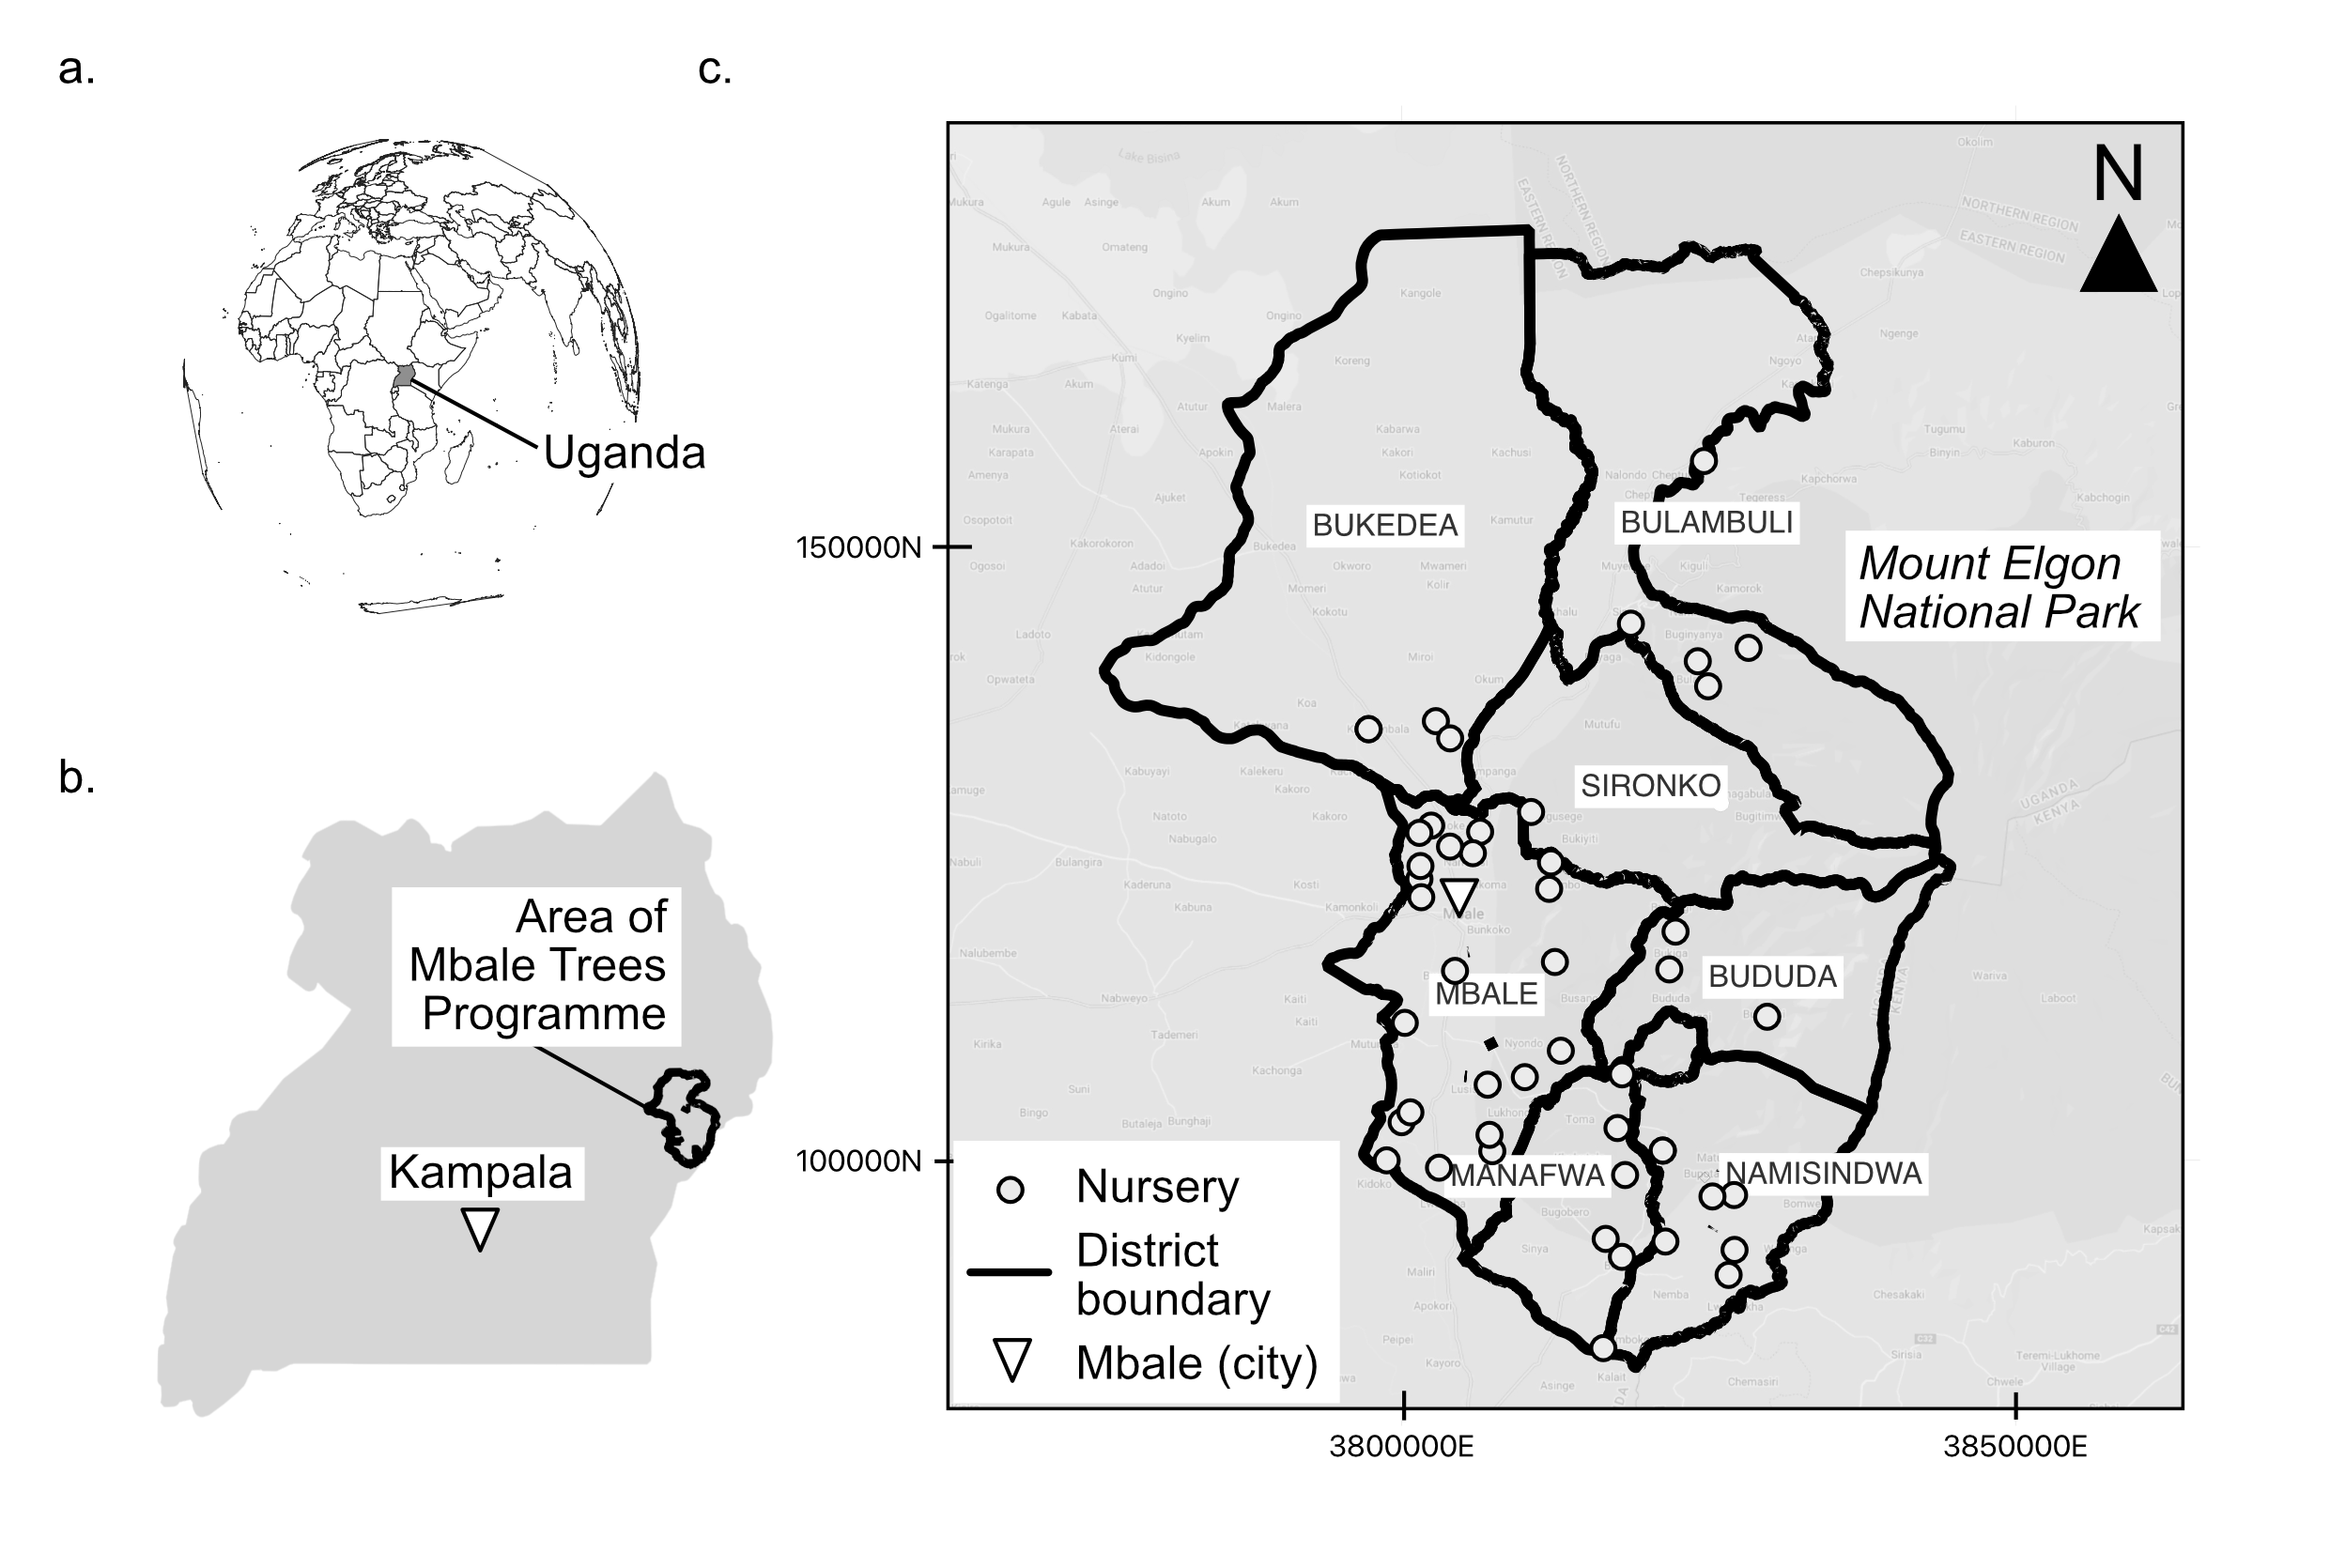 An image showing Uganda and the Mbale Trees Programme nurseries locations. The image consists of three panels. The first shows the location of Uganda on a world map. The second shows an outline of Uganda with the Mbale Trees Programme area in eastern Uganda highlighted. The last panel shows the outline of the seven districts and tree nursery locations in the Mbale Tree Programme.